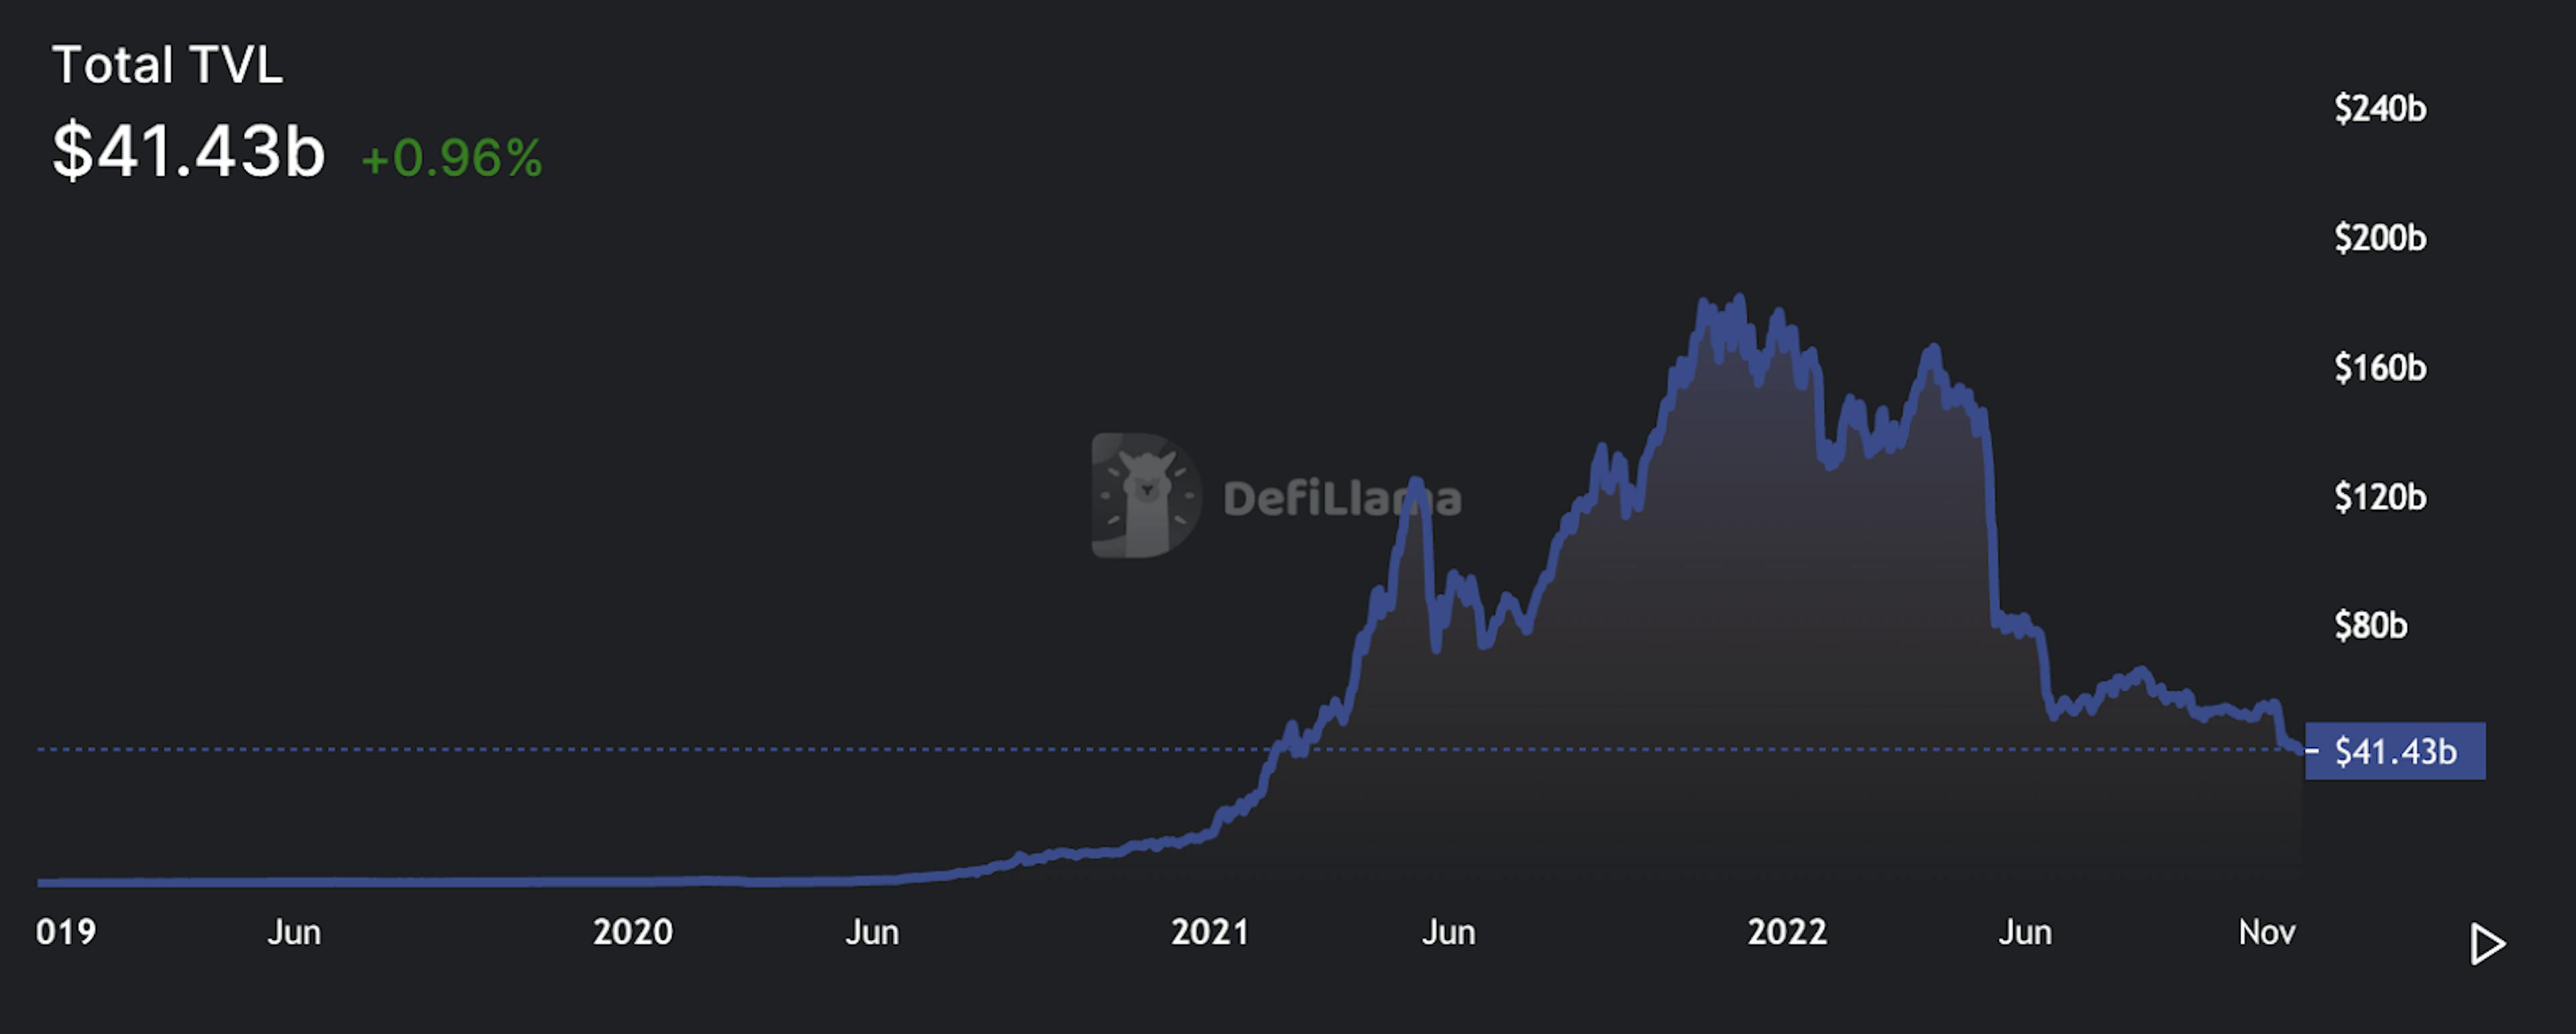 TVL Dynamics For Decentralized Finance – Note That The DAO Market Is Currently Higher.